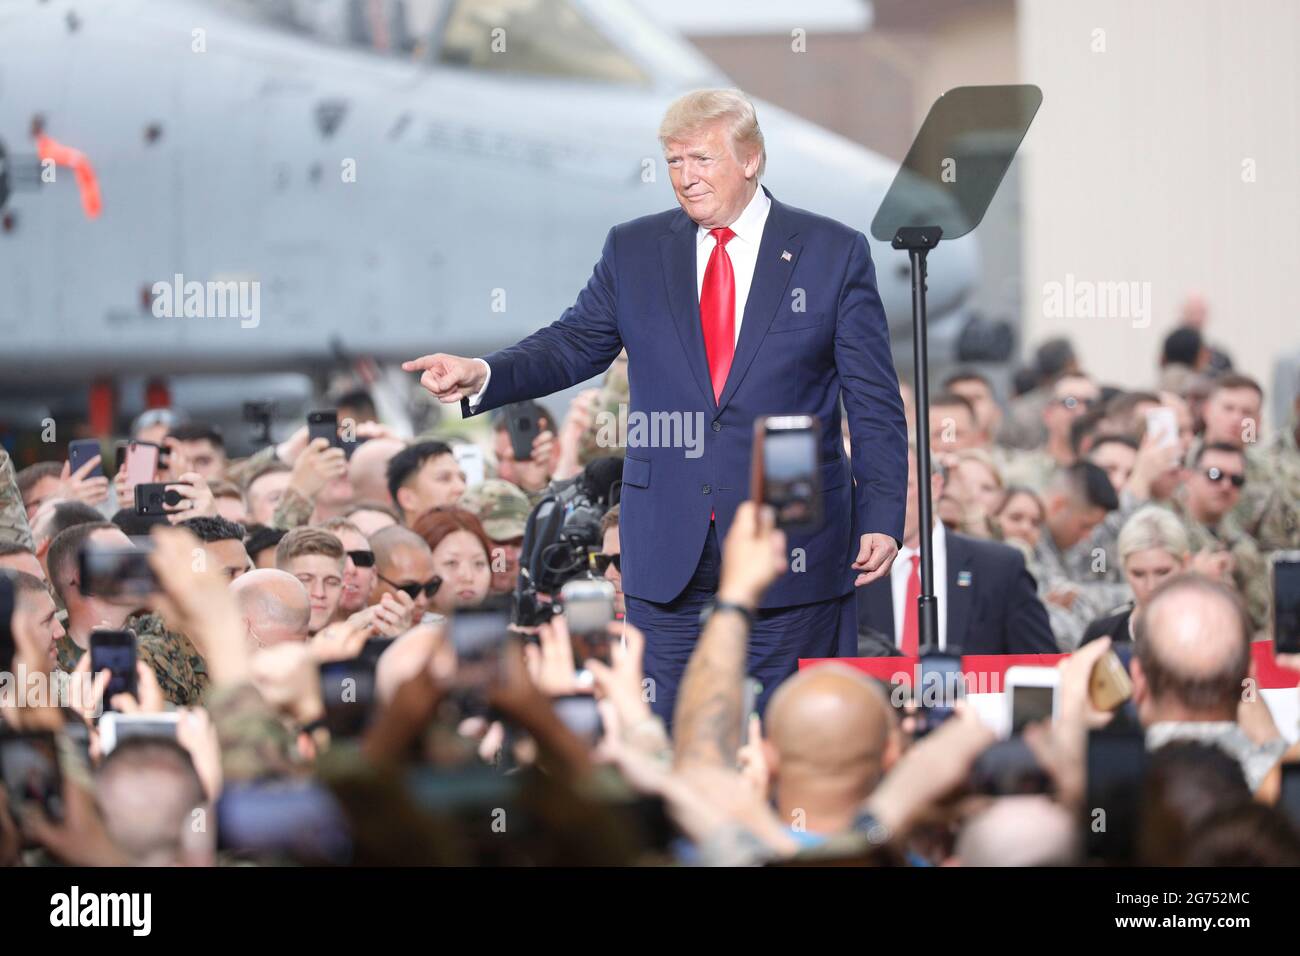 June 30, 2019-Osan, South Korea-US President Donald Trump action after arrives at Osan Military airbase for their soldiers meet event at Osan Airbase in Osan, South Korea.US President Donald Trump meet North Korean Leder Kim Jong Un today at truce village Panmunjom. Stock Photo